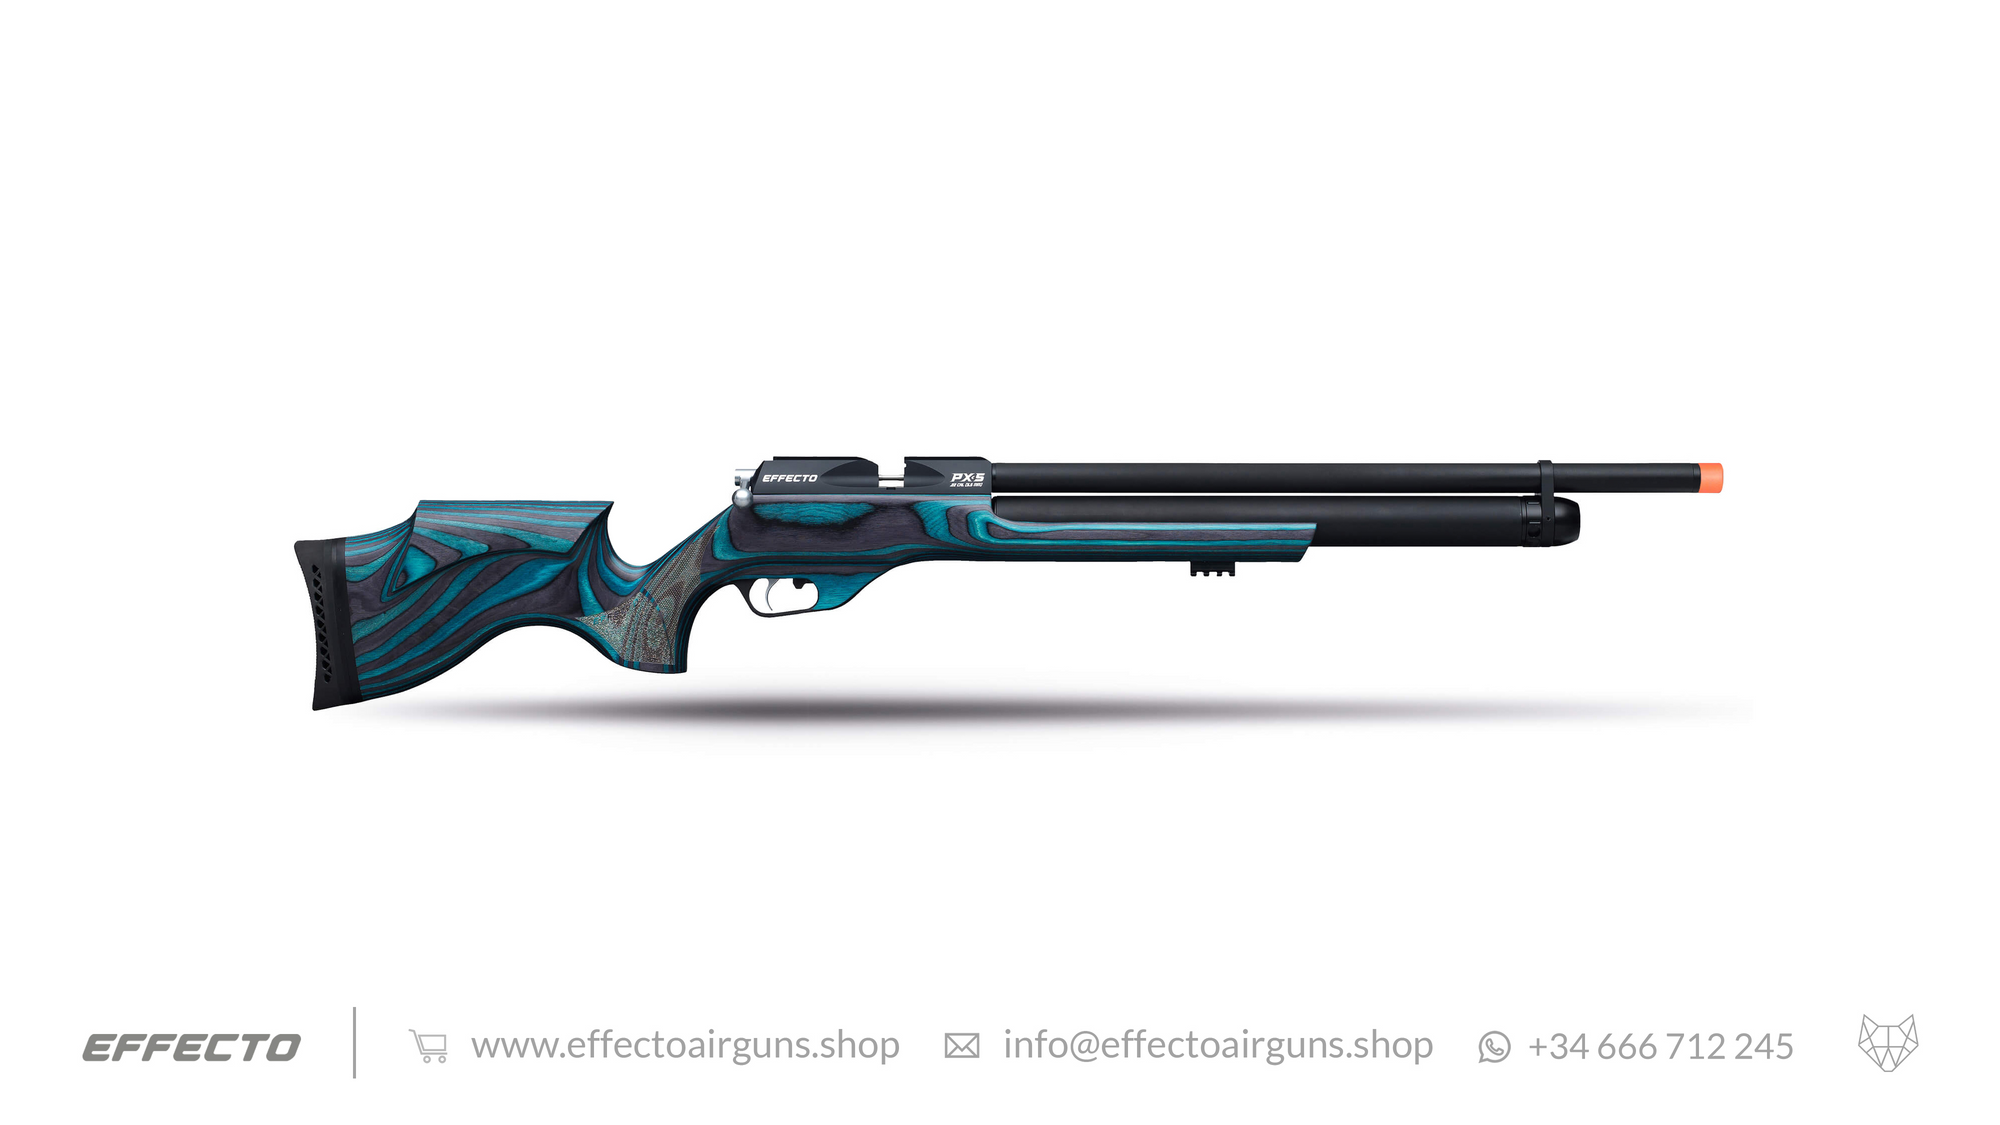 Airgun PX-5 Standard in laminated blue side view